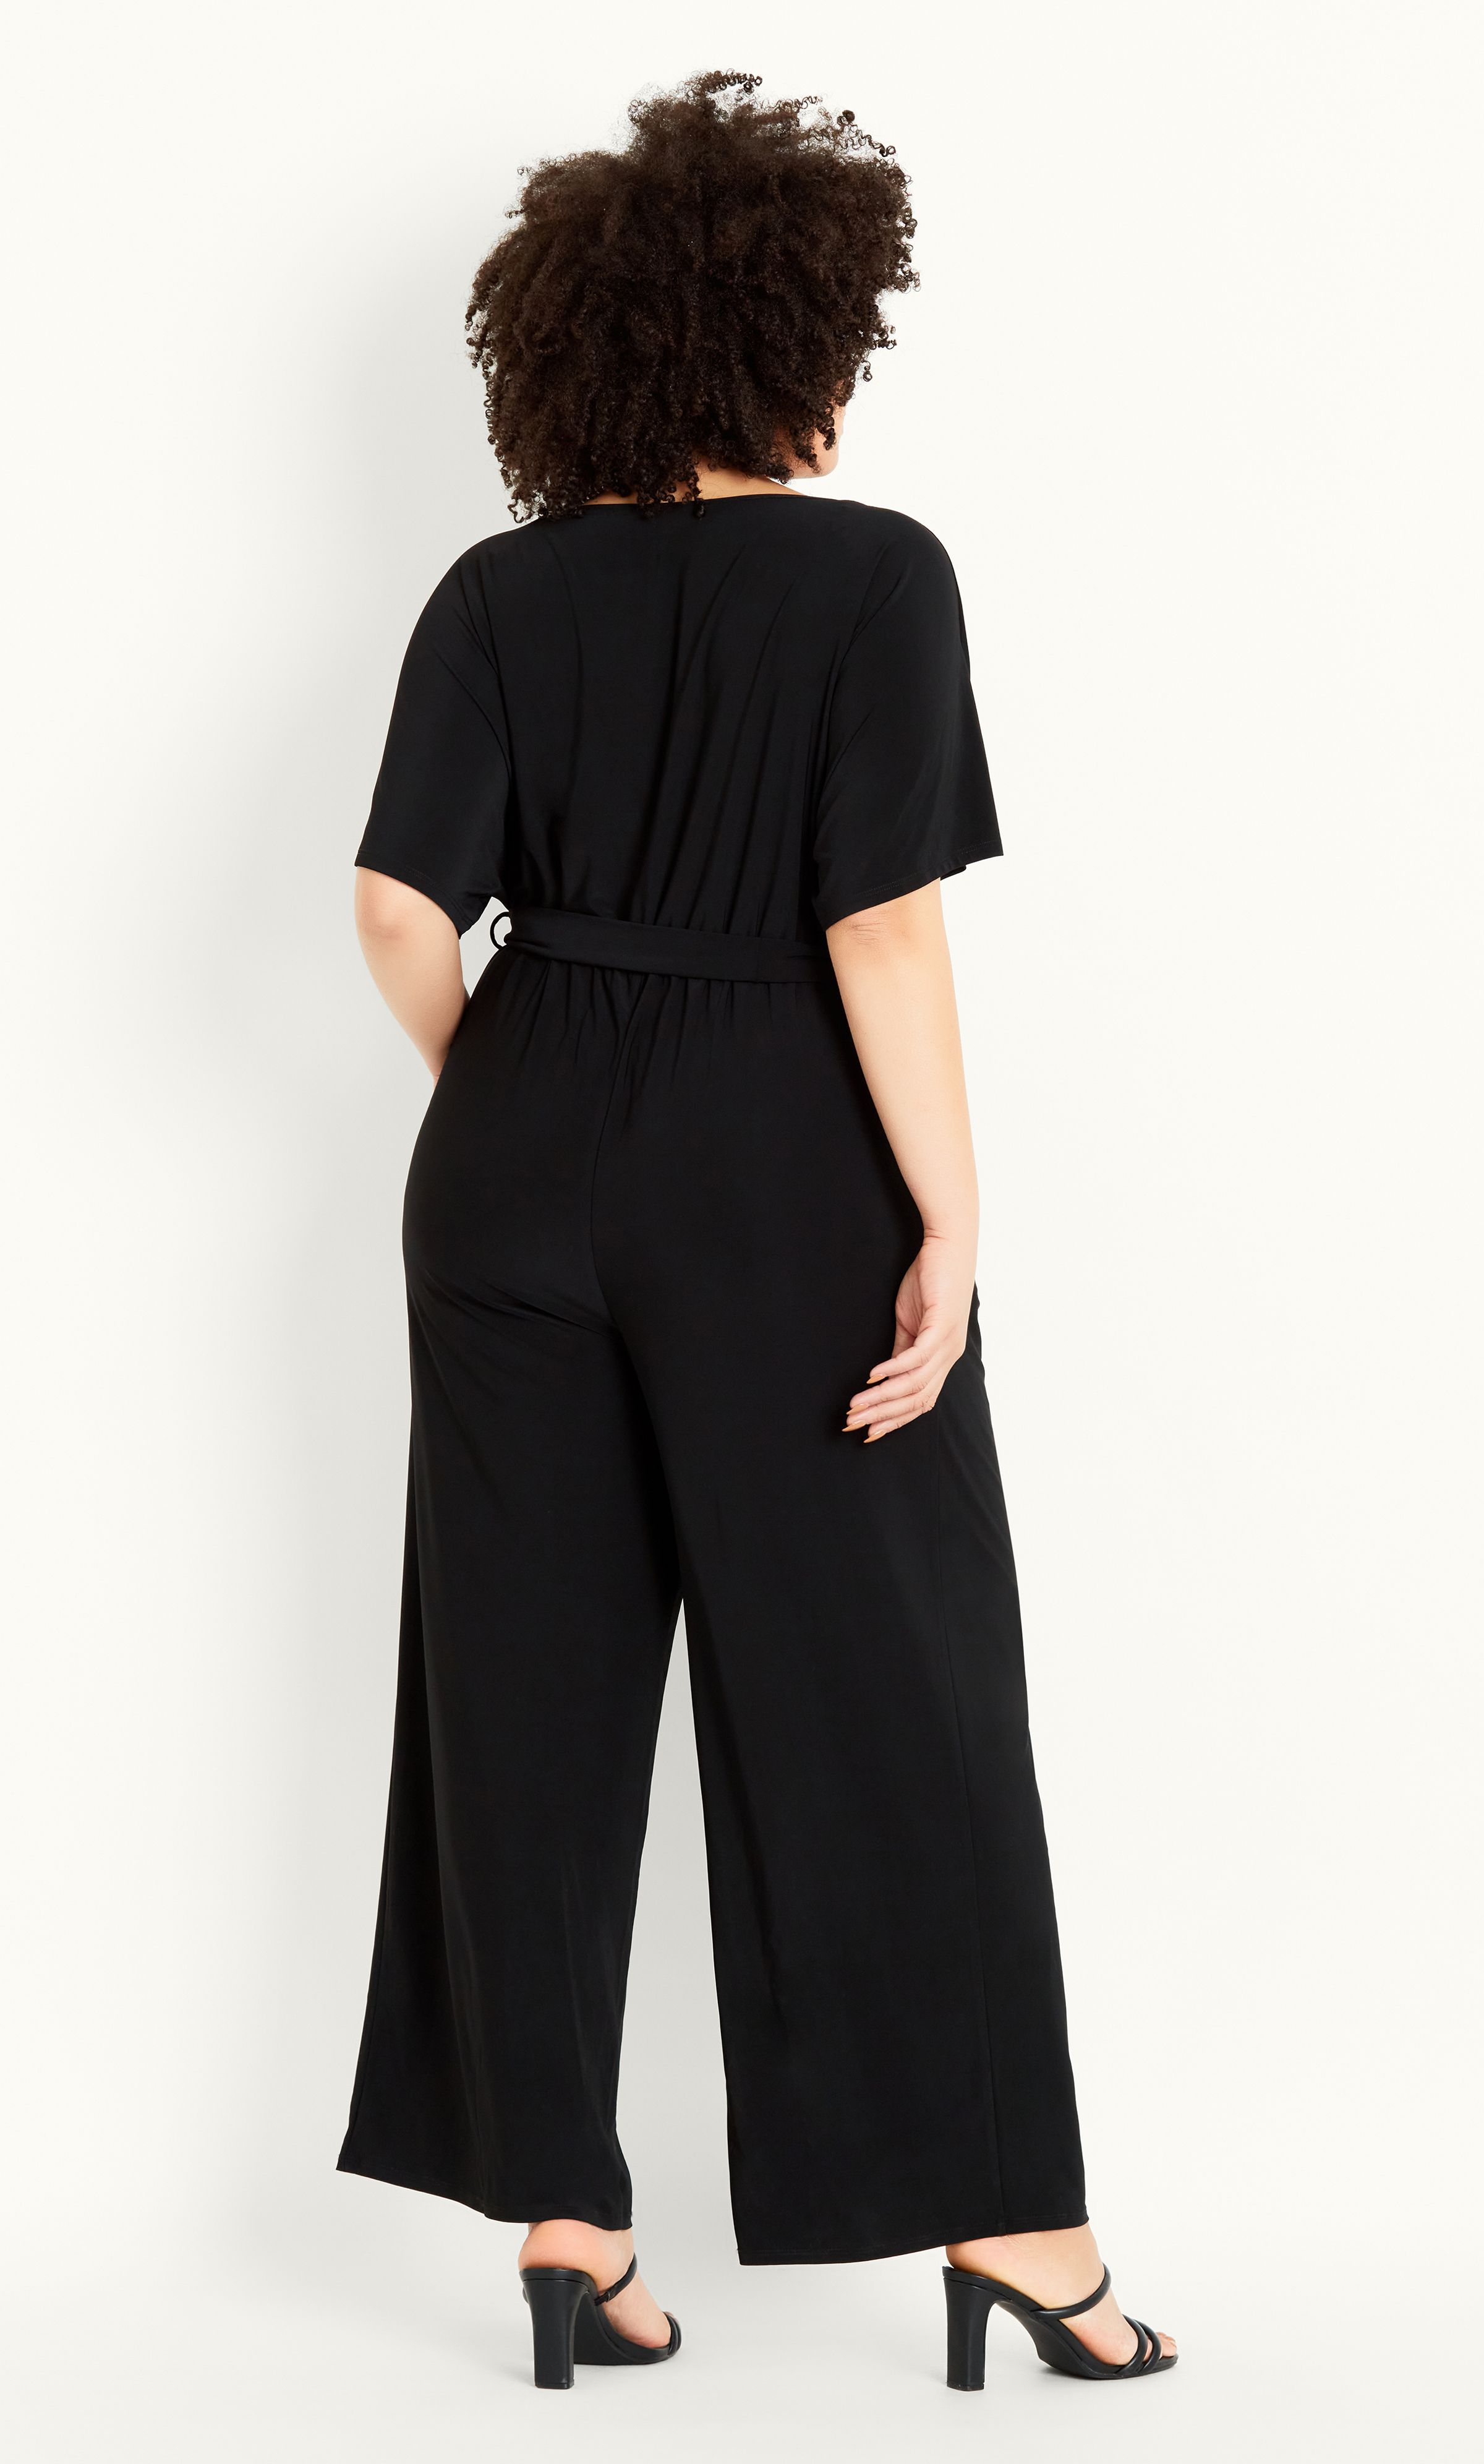 Sleek, chic and all kinds of curve-loving, the Wrap Tie Belt Jumpsuit is as flattering as it is utterly on-trend! Flirting with a plunging V-neck line and cinched waist, as well as a fashionable wide leg, this jumpsuit is a go-to when it comes to classy cocktails and after work drinks. Key Features Include: - Faux wrap V-neckline - Short sleeves - Side pockets - Elasticated waistline - Removable self-tie waist belt - Soft stretch fabrication - Relaxed leg - Unlined - Pull up style - Full length Add a touch of opulence with statement earrings, strappy stilettos and a fierce red lip.